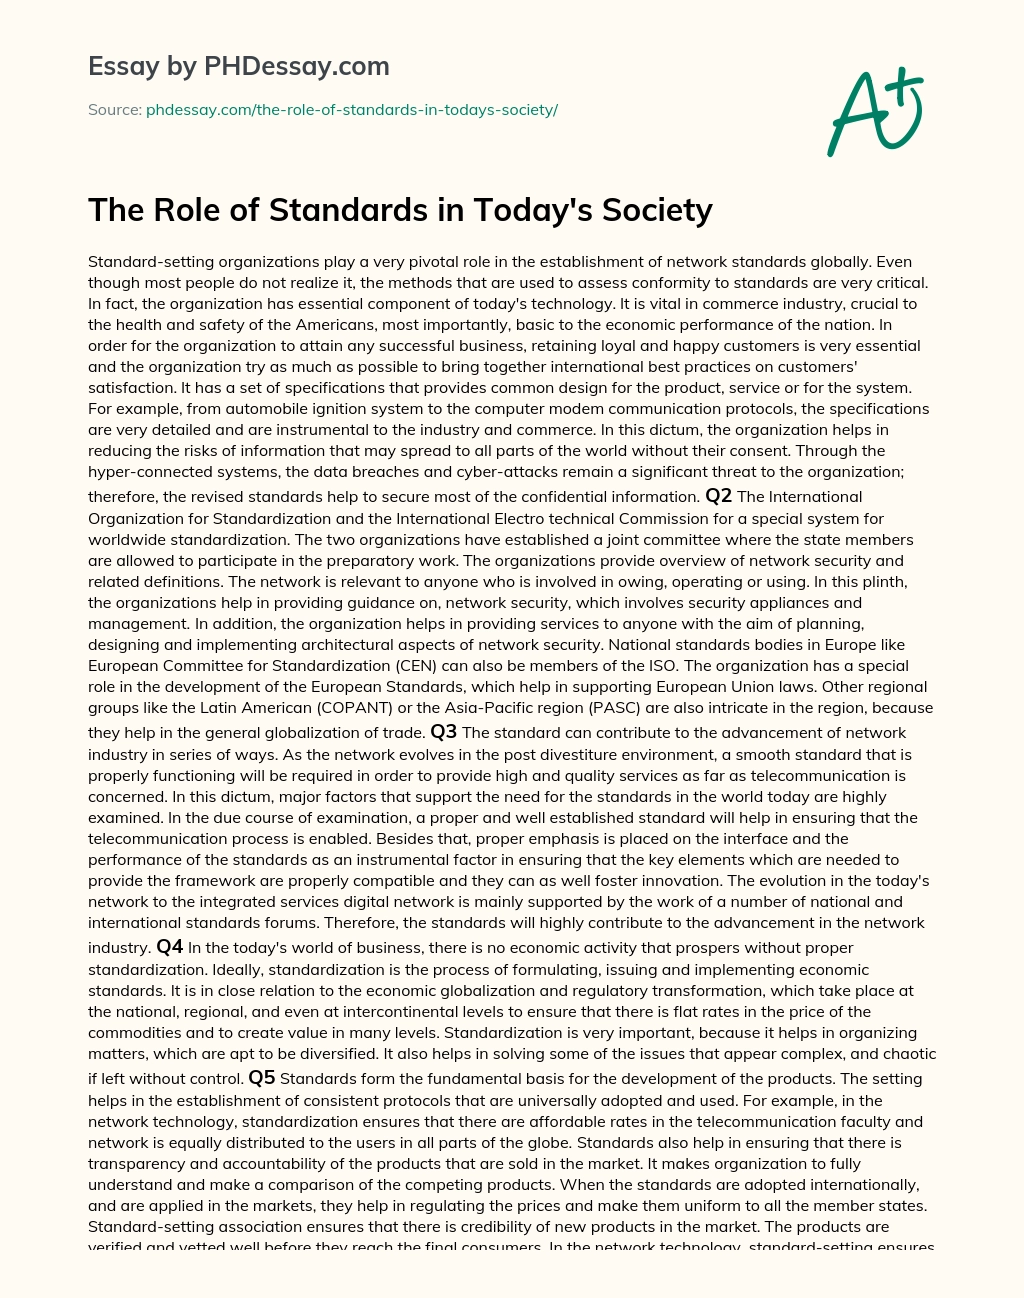 The Role of Standards in Today’s Society essay